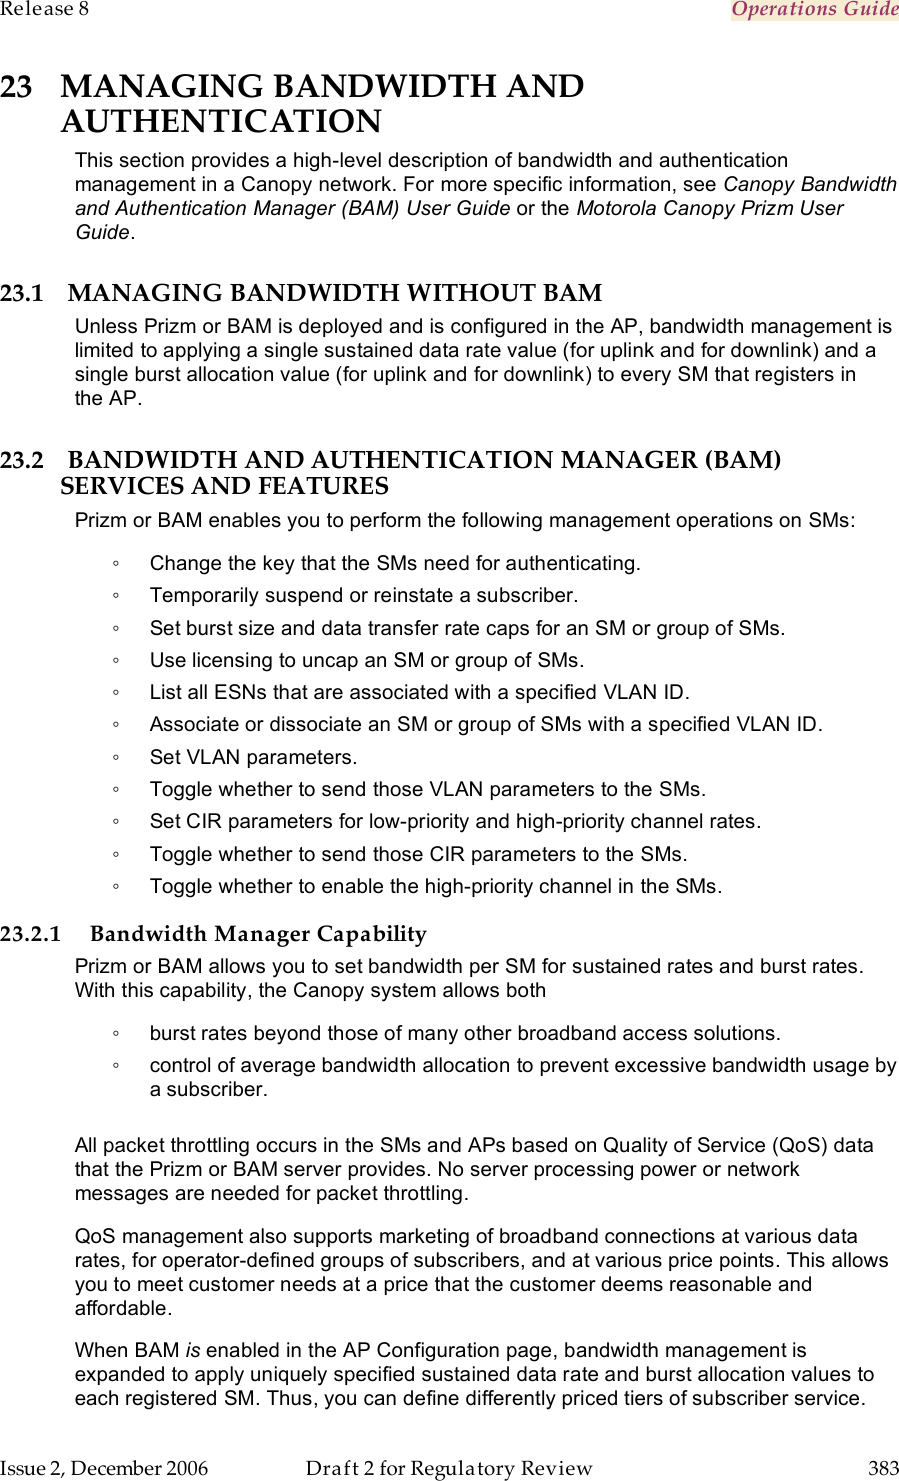 Release 8    Operations Guide   Issue 2, December 2006  Draft 2 for Regulatory Review  383     23 MANAGING BANDWIDTH AND AUTHENTICATION This section provides a high-level description of bandwidth and authentication management in a Canopy network. For more specific information, see Canopy Bandwidth and Authentication Manager (BAM) User Guide or the Motorola Canopy Prizm User Guide. 23.1 MANAGING BANDWIDTH WITHOUT BAM Unless Prizm or BAM is deployed and is configured in the AP, bandwidth management is limited to applying a single sustained data rate value (for uplink and for downlink) and a single burst allocation value (for uplink and for downlink) to every SM that registers in the AP. 23.2 BANDWIDTH AND AUTHENTICATION MANAGER (BAM) SERVICES AND FEATURES Prizm or BAM enables you to perform the following management operations on SMs: ◦  Change the key that the SMs need for authenticating. ◦  Temporarily suspend or reinstate a subscriber. ◦  Set burst size and data transfer rate caps for an SM or group of SMs. ◦  Use licensing to uncap an SM or group of SMs. ◦  List all ESNs that are associated with a specified VLAN ID. ◦  Associate or dissociate an SM or group of SMs with a specified VLAN ID. ◦  Set VLAN parameters. ◦  Toggle whether to send those VLAN parameters to the SMs. ◦  Set CIR parameters for low-priority and high-priority channel rates. ◦  Toggle whether to send those CIR parameters to the SMs. ◦  Toggle whether to enable the high-priority channel in the SMs. 23.2.1 Bandwidth Manager Capability Prizm or BAM allows you to set bandwidth per SM for sustained rates and burst rates. With this capability, the Canopy system allows both ◦  burst rates beyond those of many other broadband access solutions. ◦  control of average bandwidth allocation to prevent excessive bandwidth usage by a subscriber.  All packet throttling occurs in the SMs and APs based on Quality of Service (QoS) data that the Prizm or BAM server provides. No server processing power or network messages are needed for packet throttling. QoS management also supports marketing of broadband connections at various data rates, for operator-defined groups of subscribers, and at various price points. This allows you to meet customer needs at a price that the customer deems reasonable and affordable. When BAM is enabled in the AP Configuration page, bandwidth management is expanded to apply uniquely specified sustained data rate and burst allocation values to each registered SM. Thus, you can define differently priced tiers of subscriber service. 